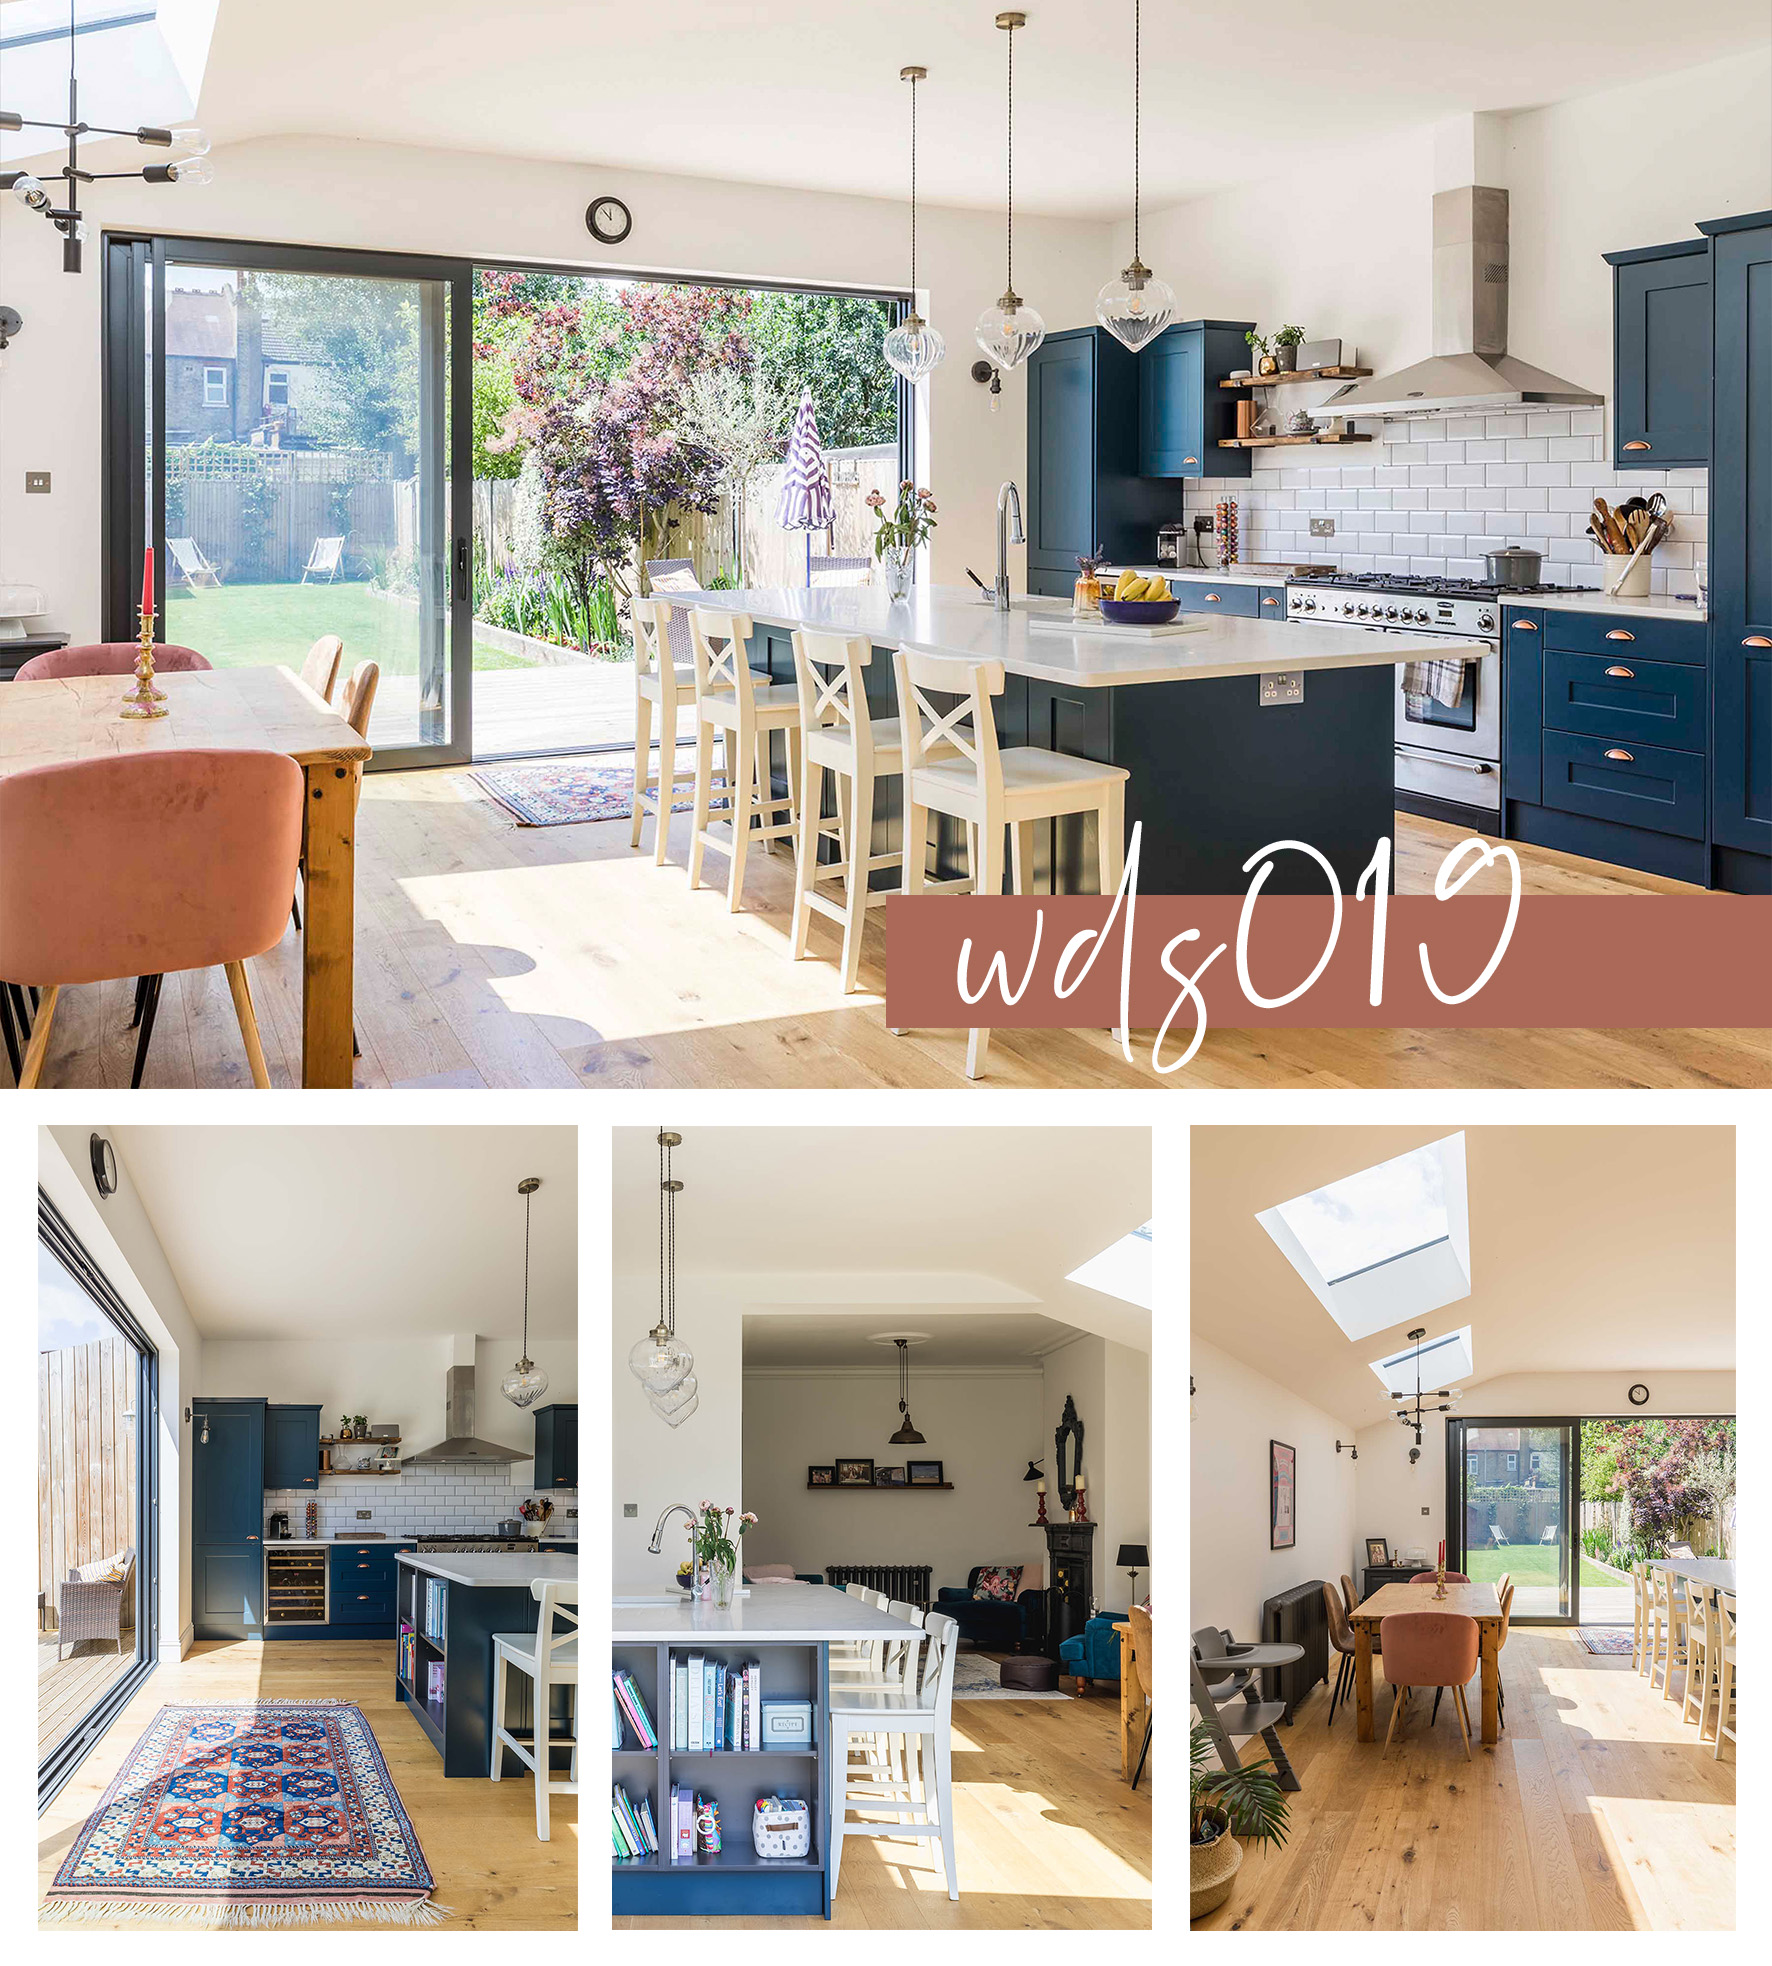 A collection of images displaying the light-filled downstairs space in this beautiful 5 bedroom Edwardian style family home based in Greater London.